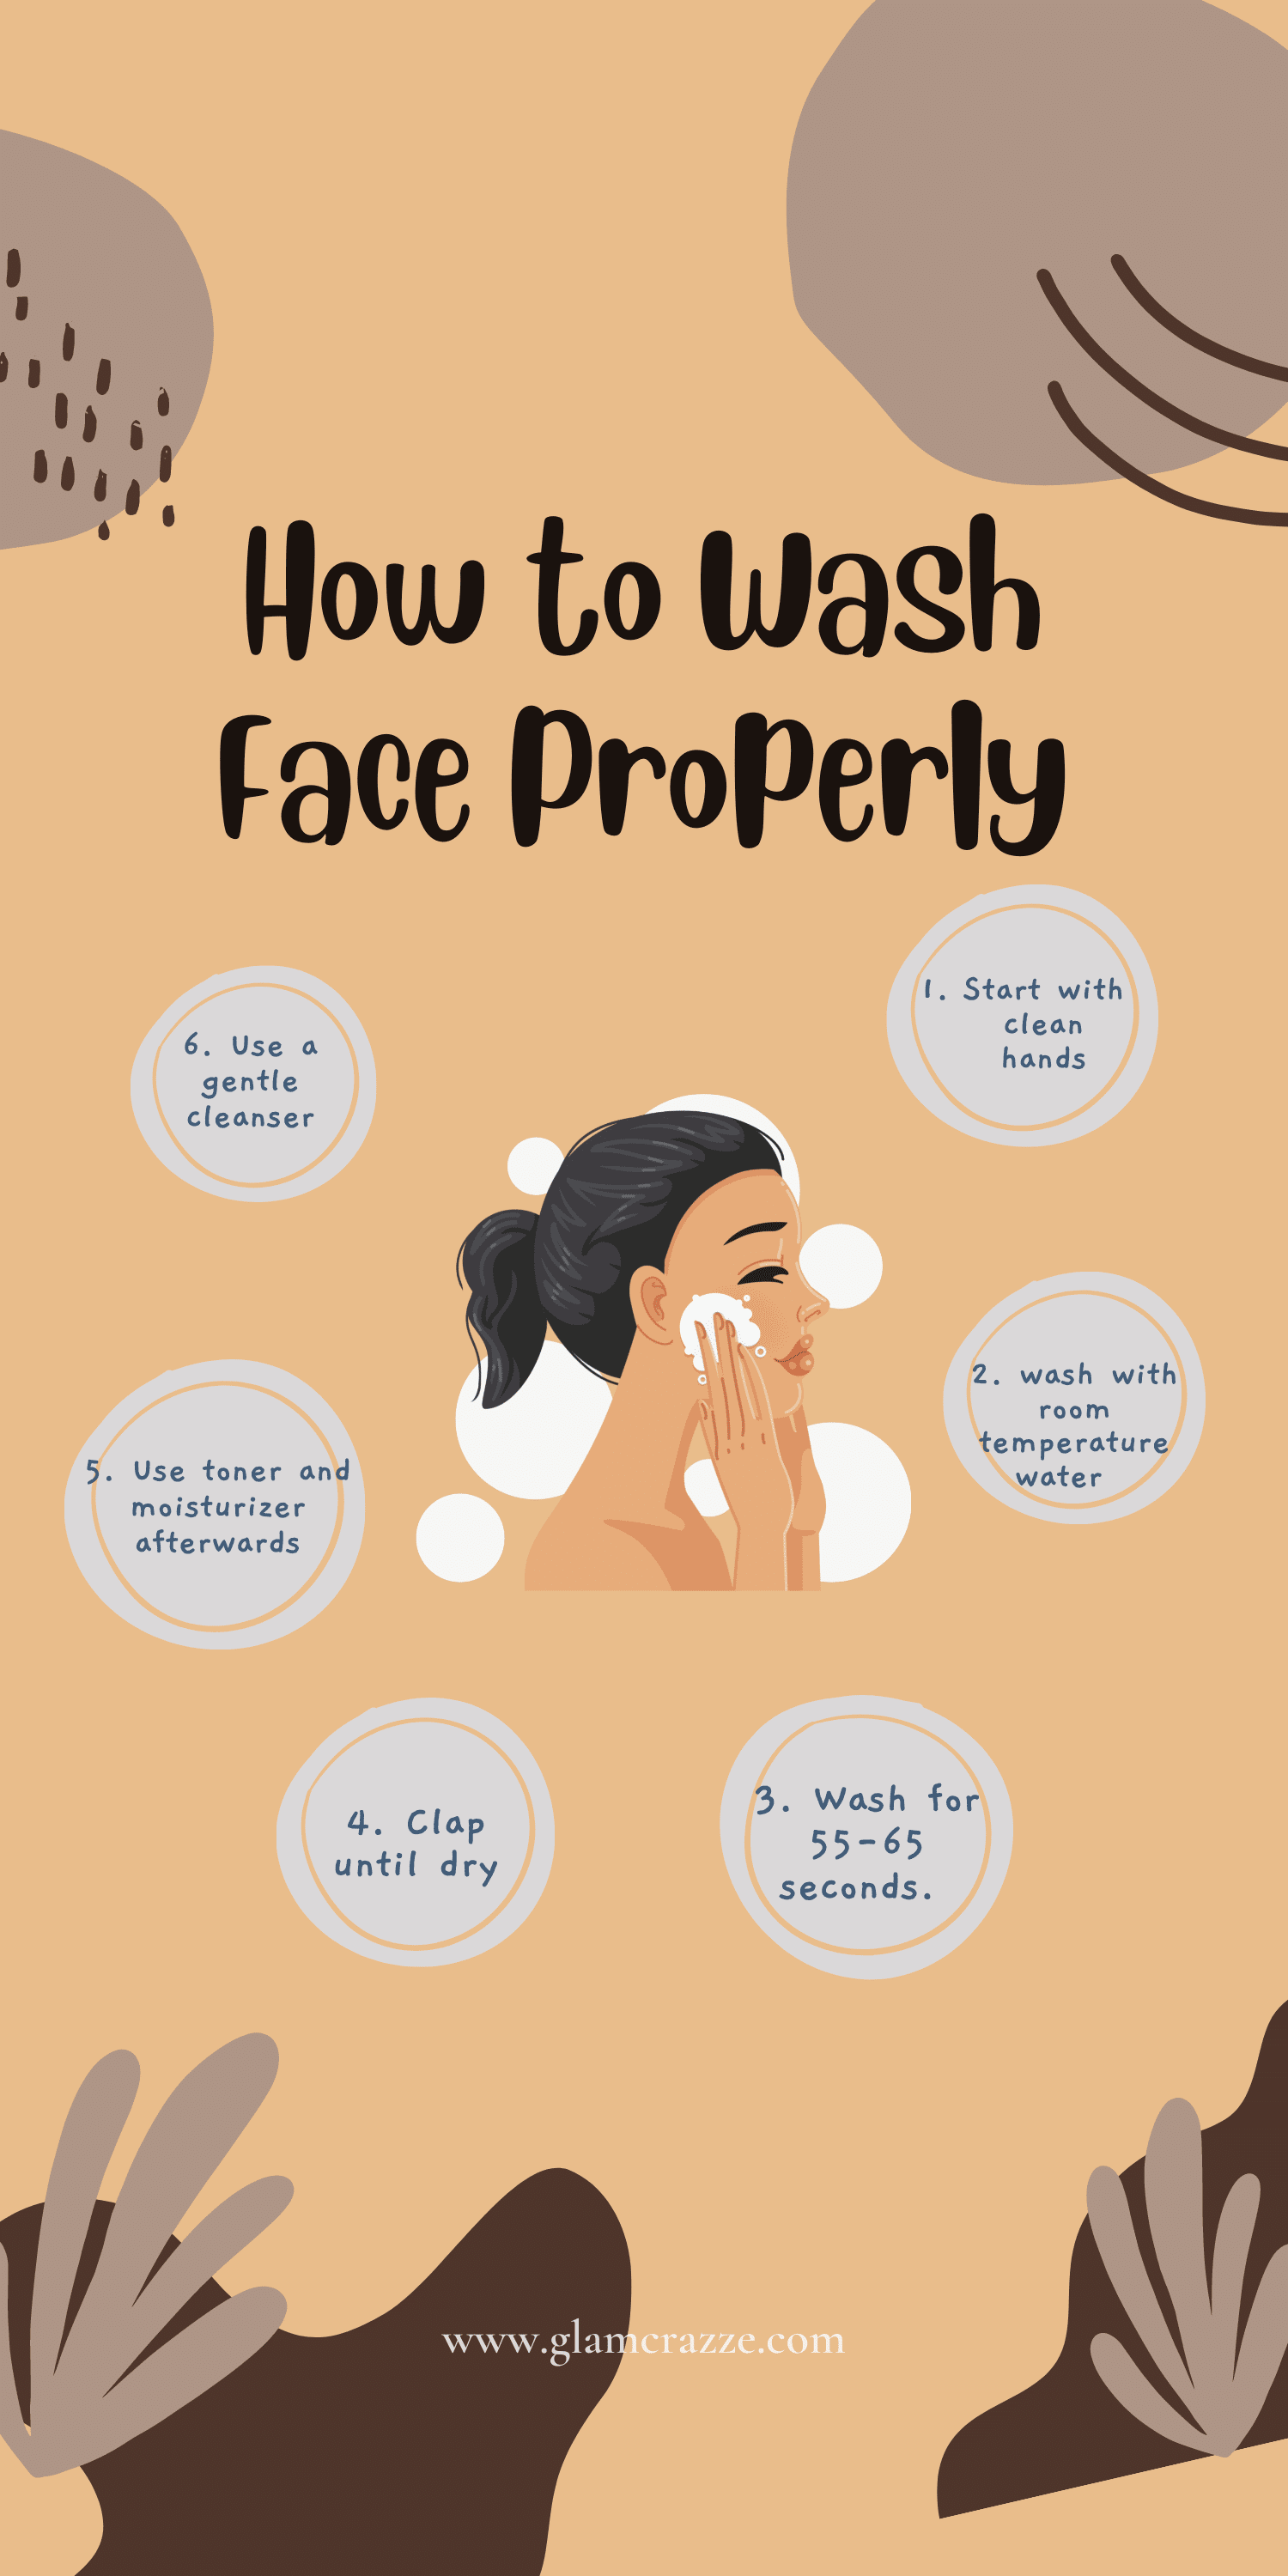 60 second skincare rule to get clear skin